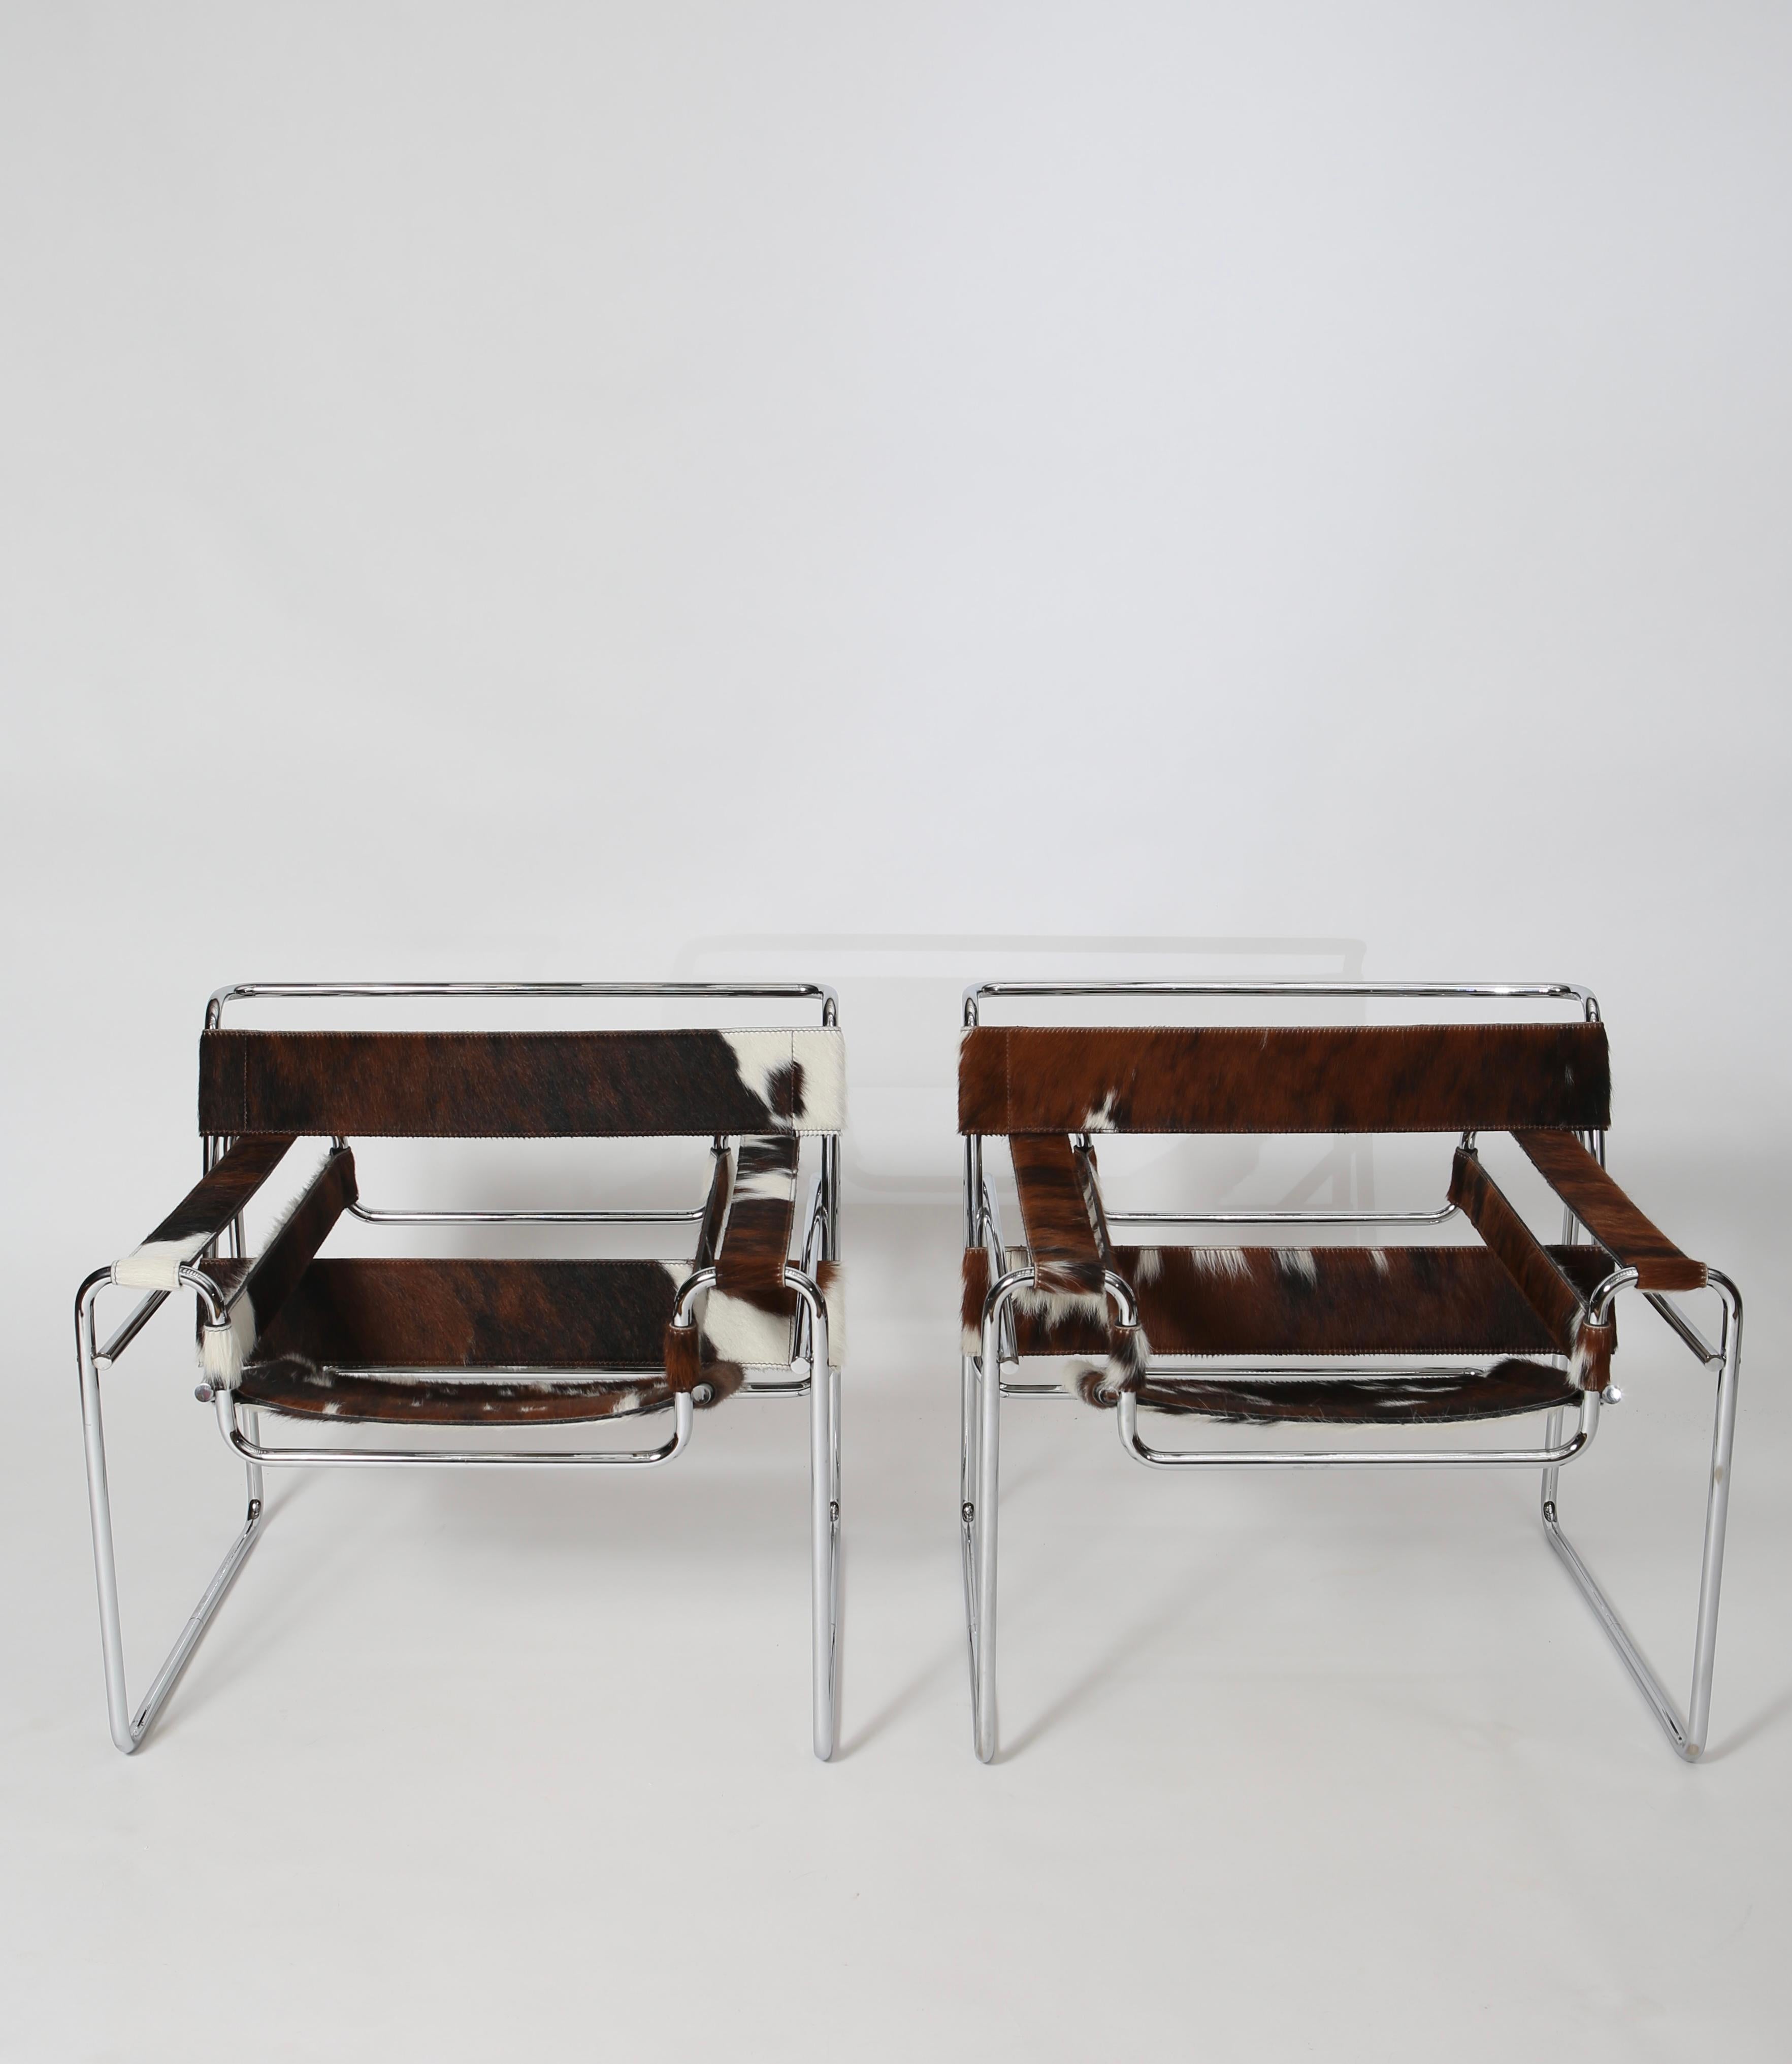 Iconic chairs by Marcel Breuer made by Knoll. Brown and white hair-on calf hide slings. Immaculate condition; produced circa 2000.
Sold as pair.